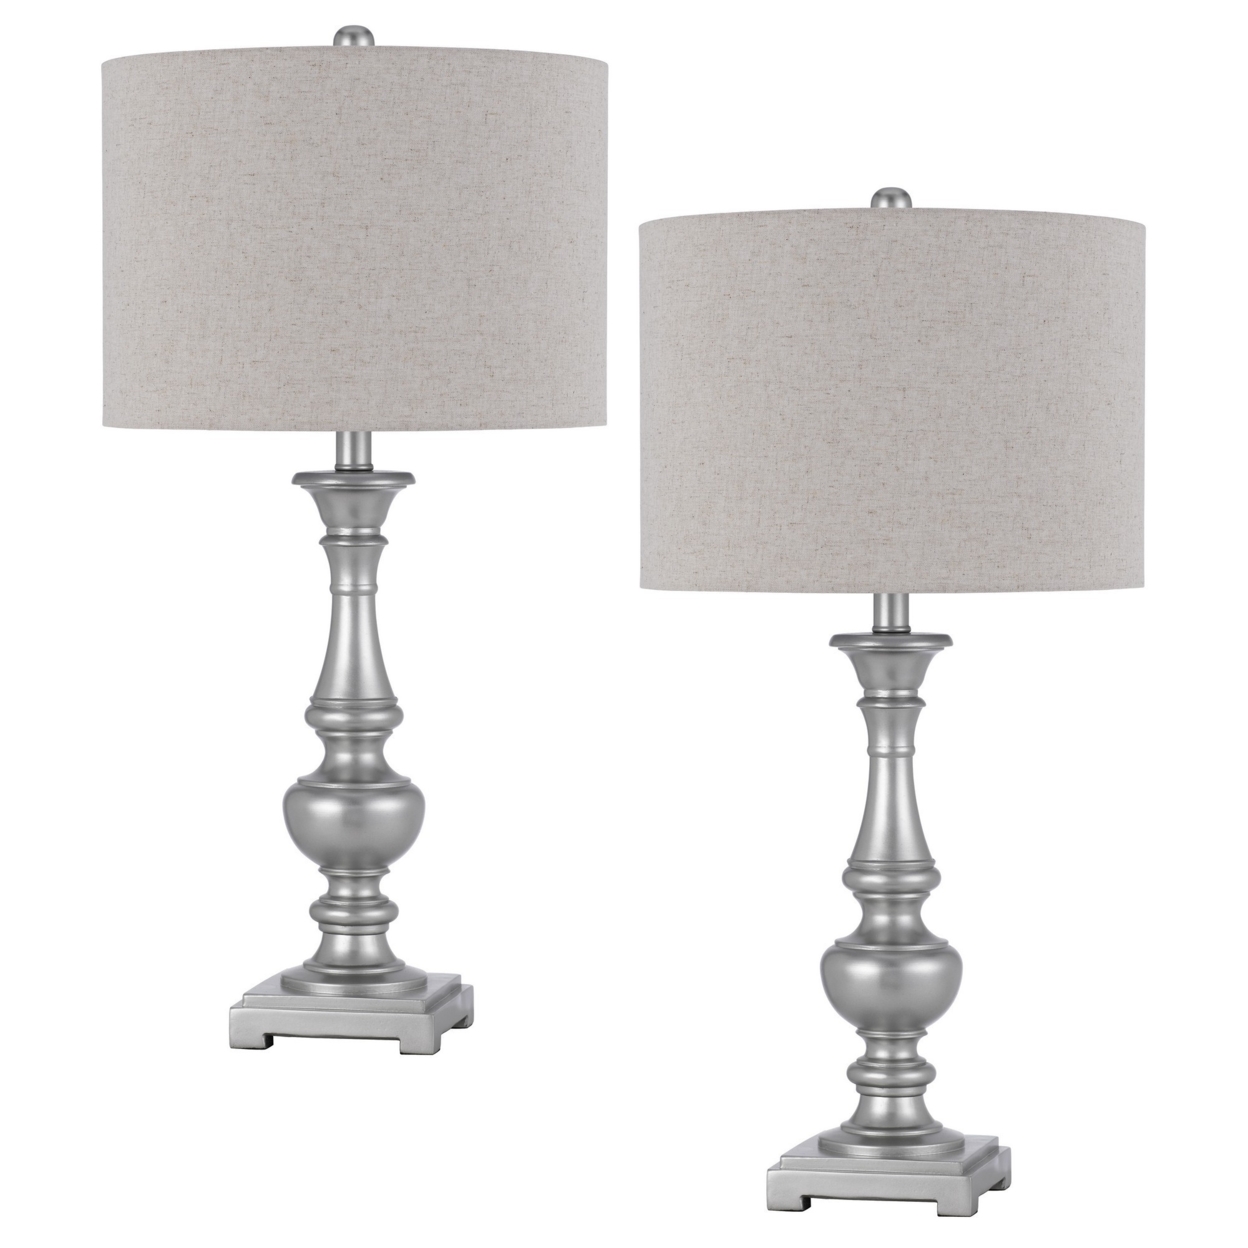 28 Inch Table Lamp, Set Of 2, Beige Fabric Shade, Silver Carved Frame- Saltoro Sherpi